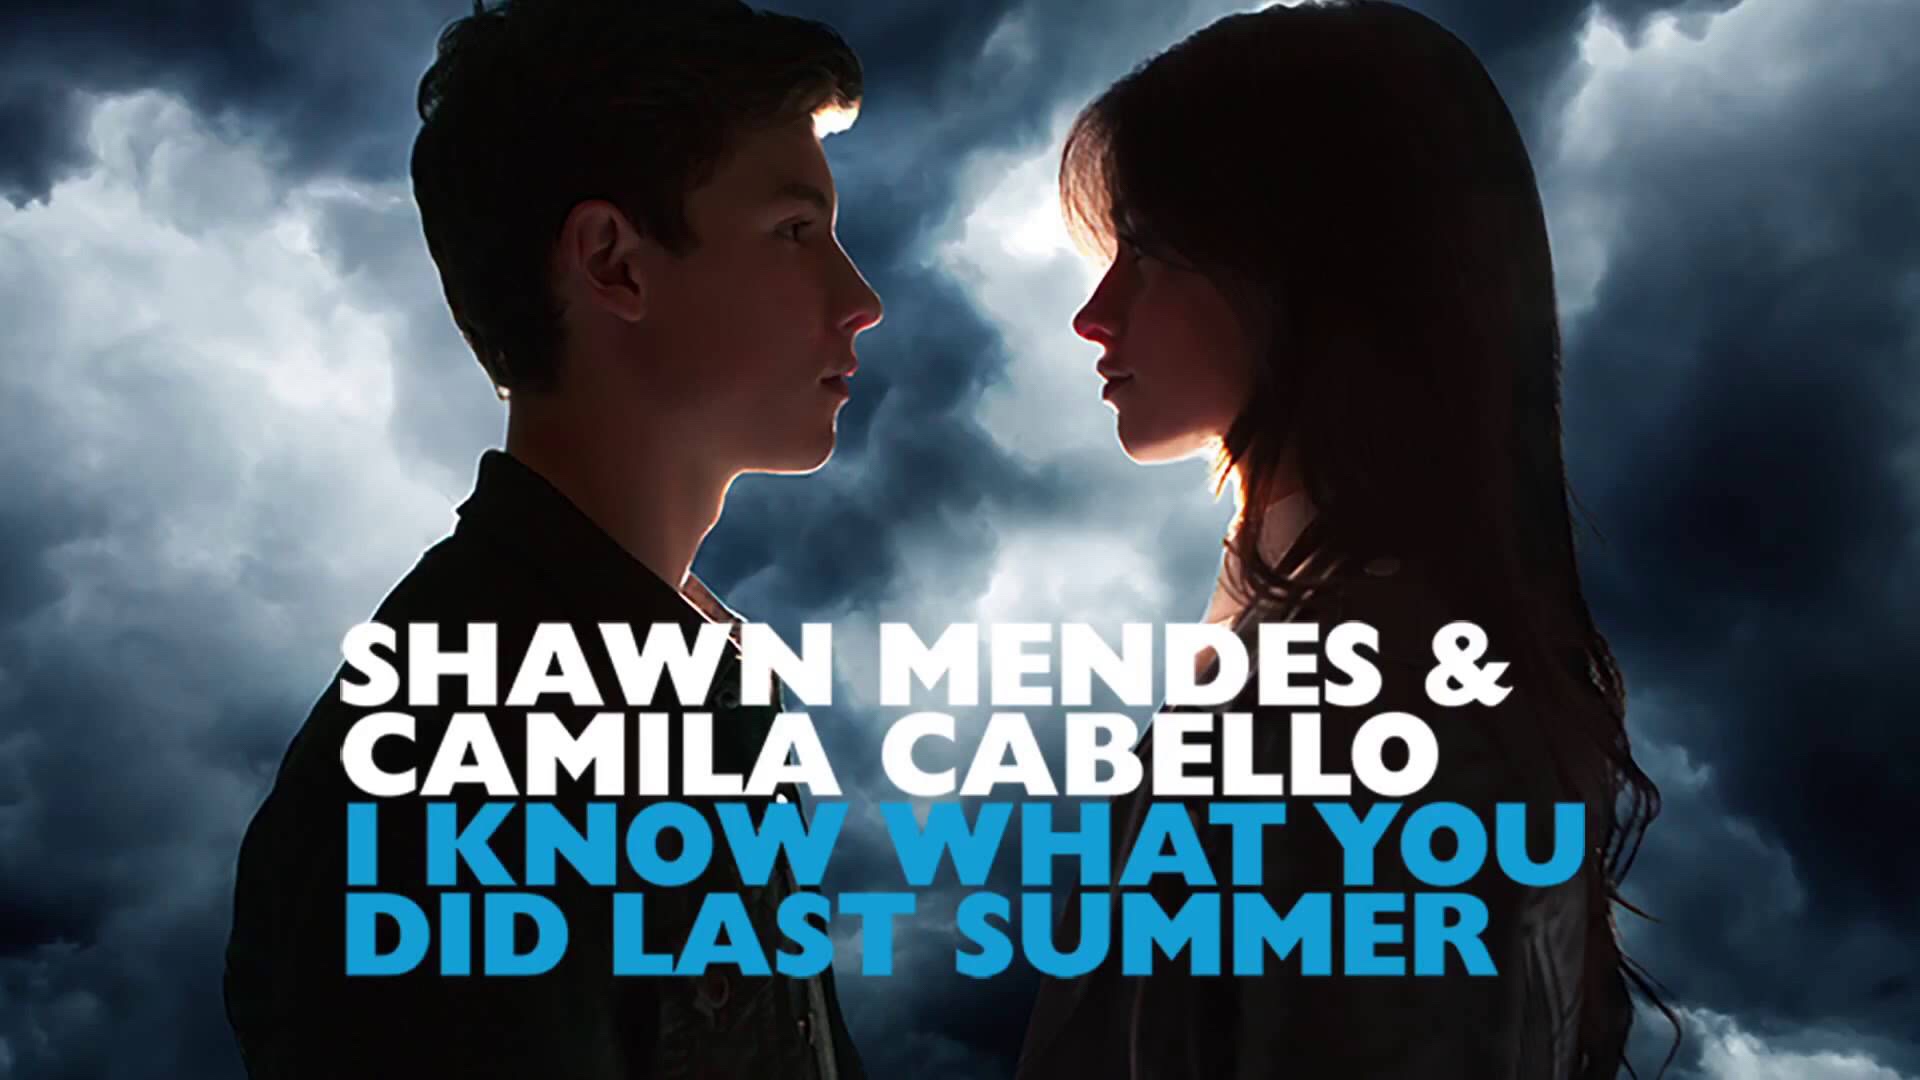 Did you well last night. Camila Cabello last Summer. Shawn Mendes & Camila Cabello - i know what you did last Summer. I know what you did last Summer песня. I know what you did.